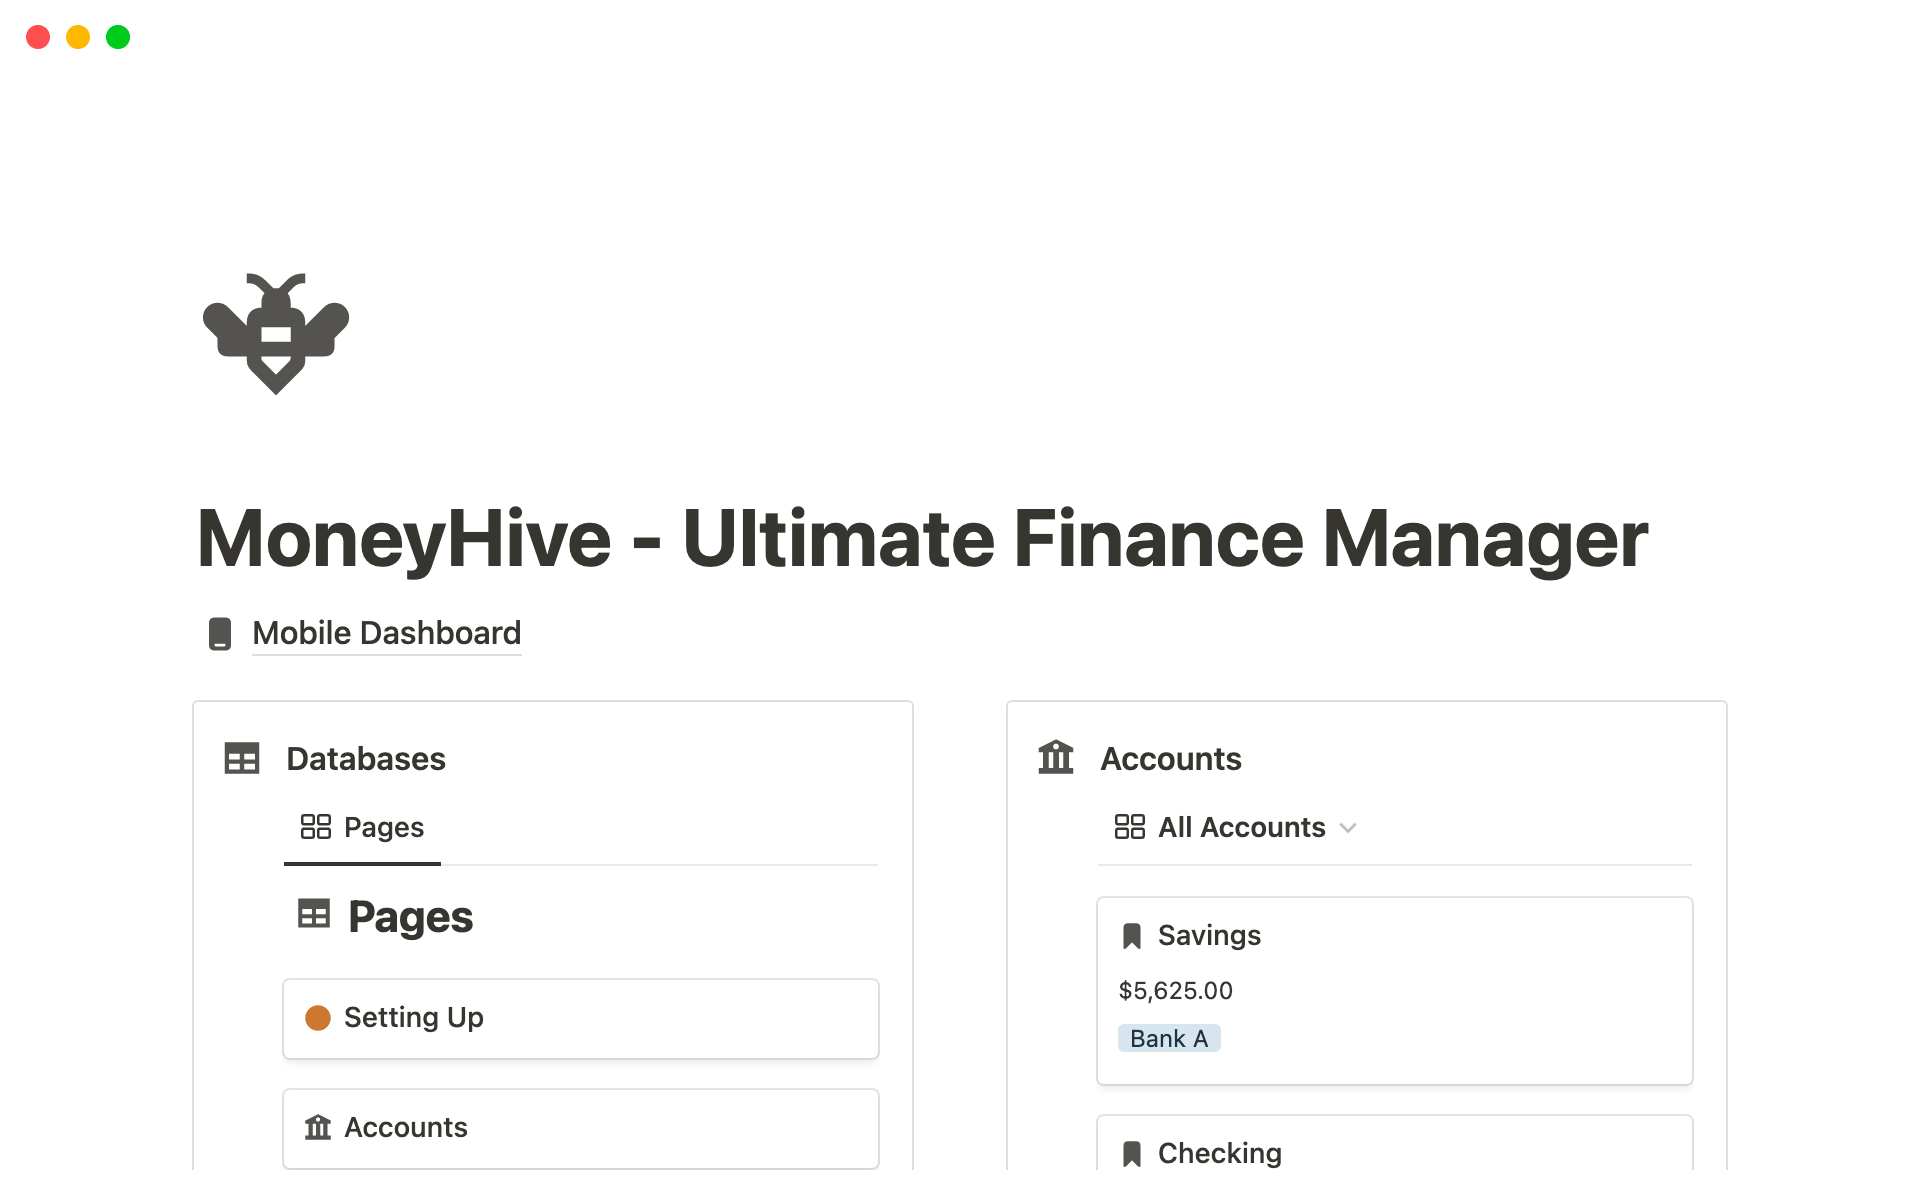 MoneyHive - The Ultimate Finance Managerのテンプレートのプレビュー